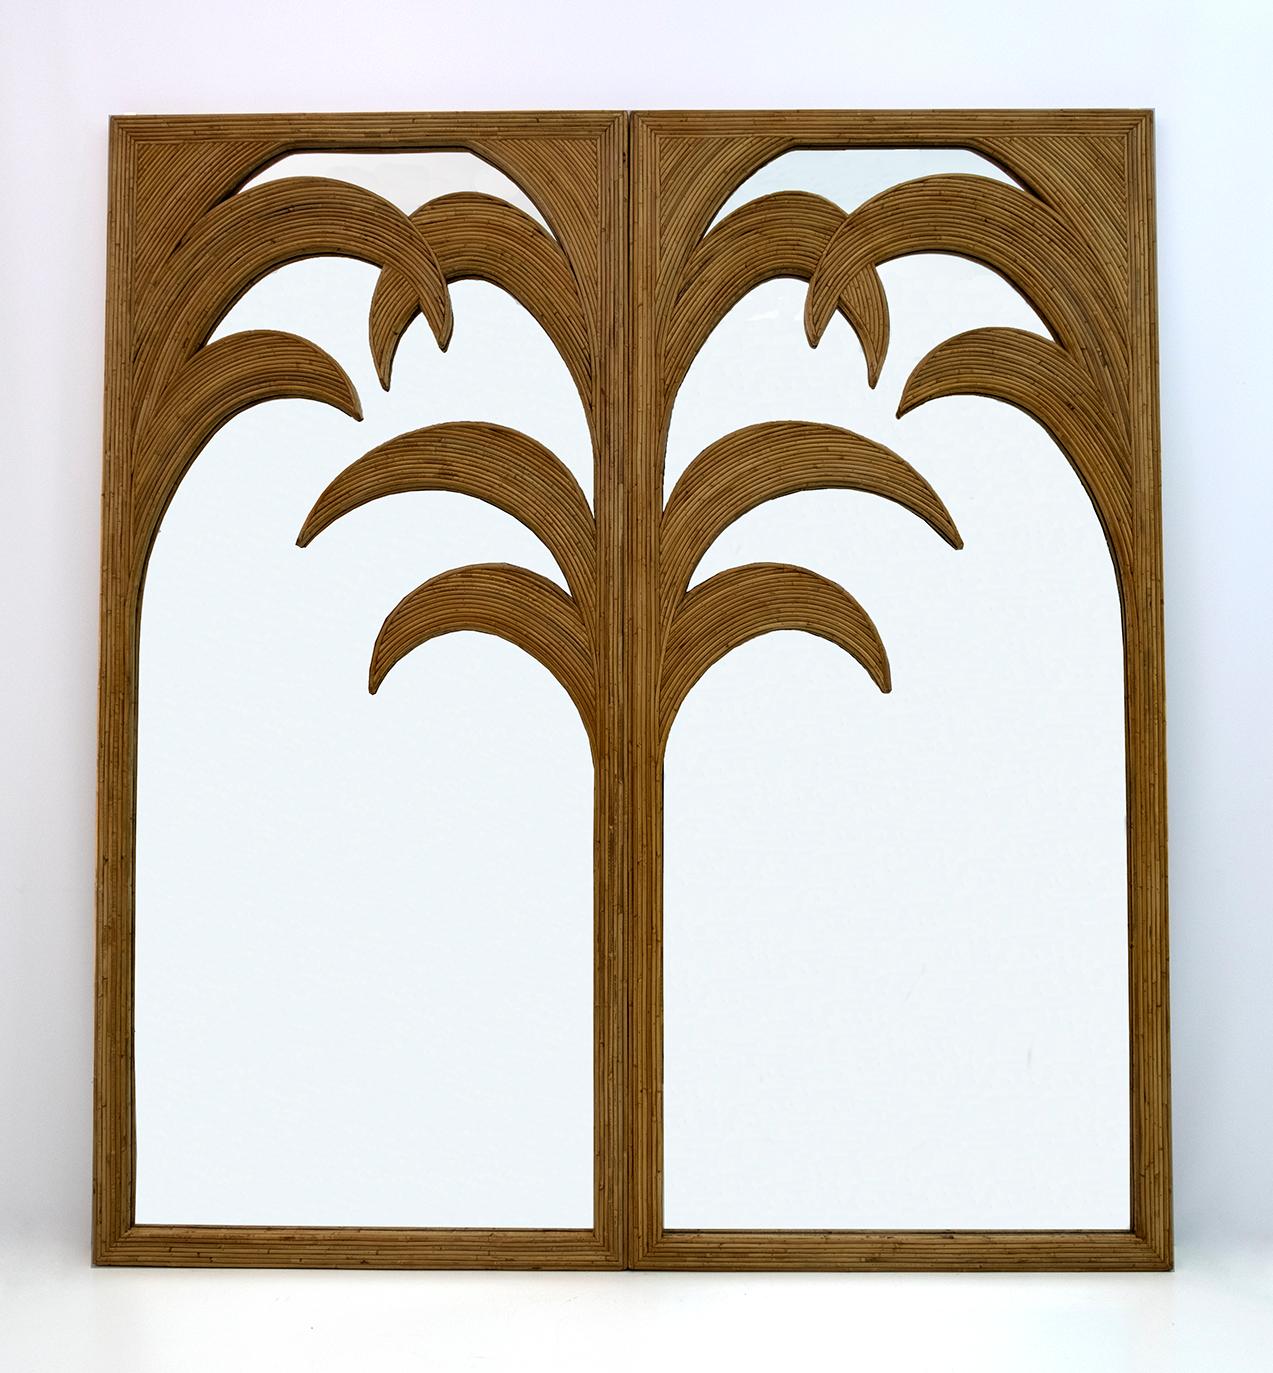 Exquisitely handmade rattan palm motif on each mirror panel, creative work by Vivai del Sud, 1970s,

Dimensions: Panel width: 102 cm Total width of the pair: 204 cm.